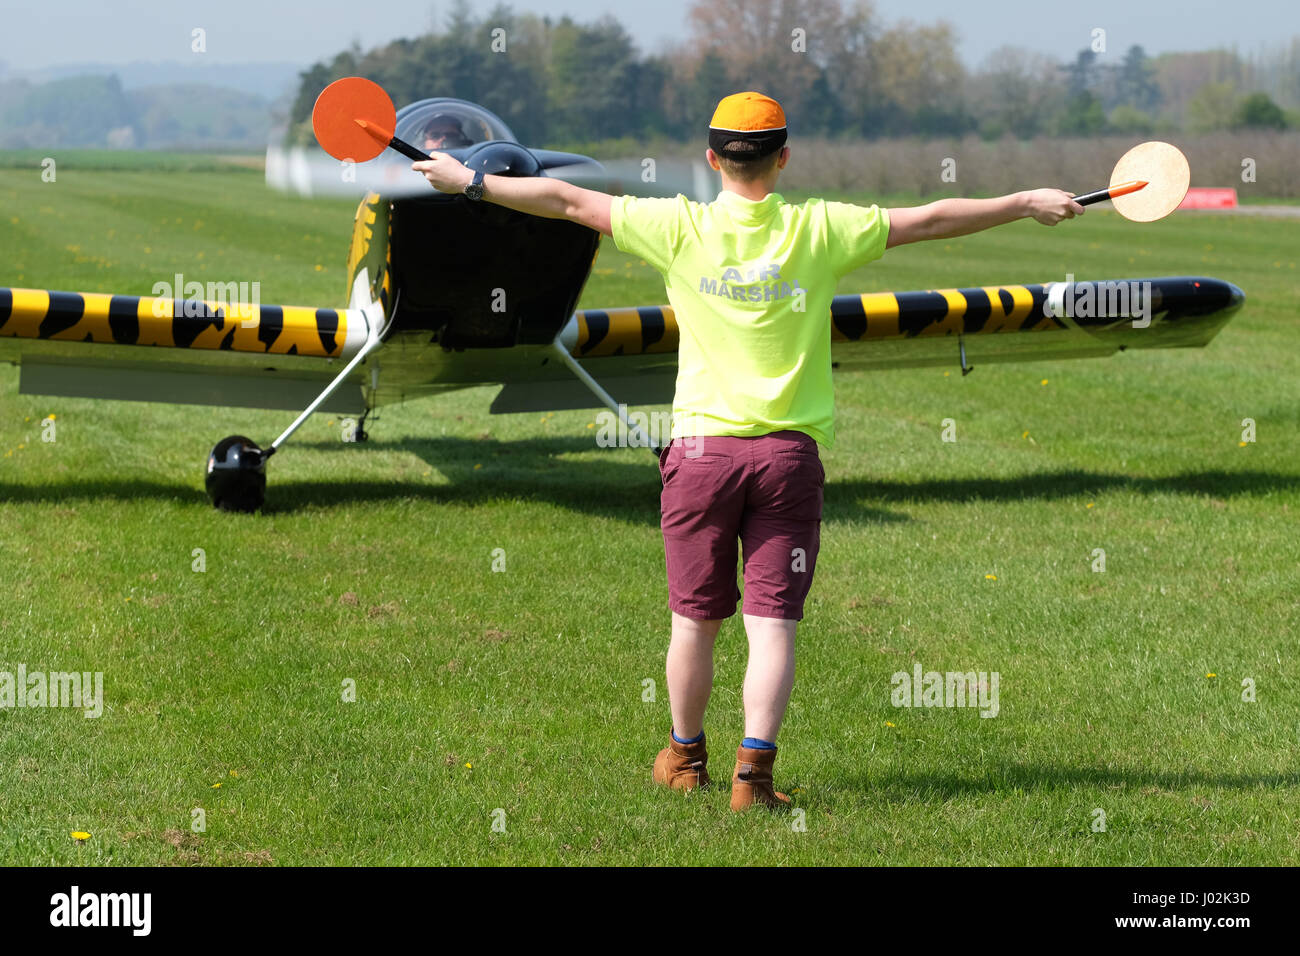 Shobdon airfield, Herefordshire, UK. April, 2017. General aviation airfield ground marshaller directs a taxying Vans RV-8 aircraft. Credit: Steven May/Alamy Live News Stock Photo